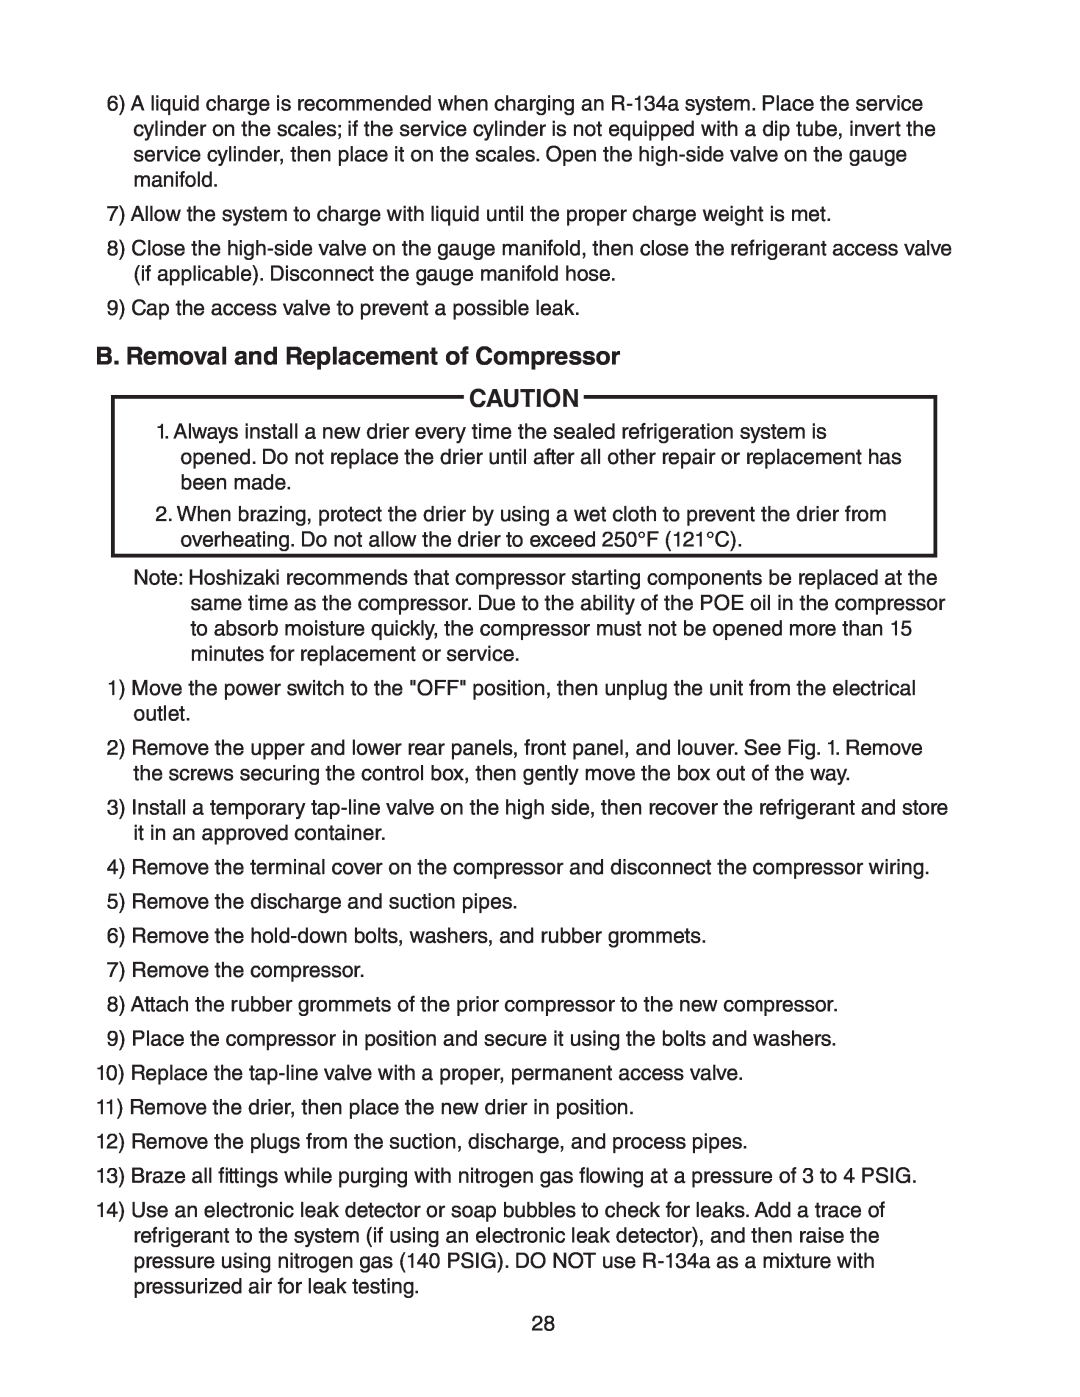 Hoshizaki C-100BAF-ADDS service manual B.Removal and Replacement of Compressor 